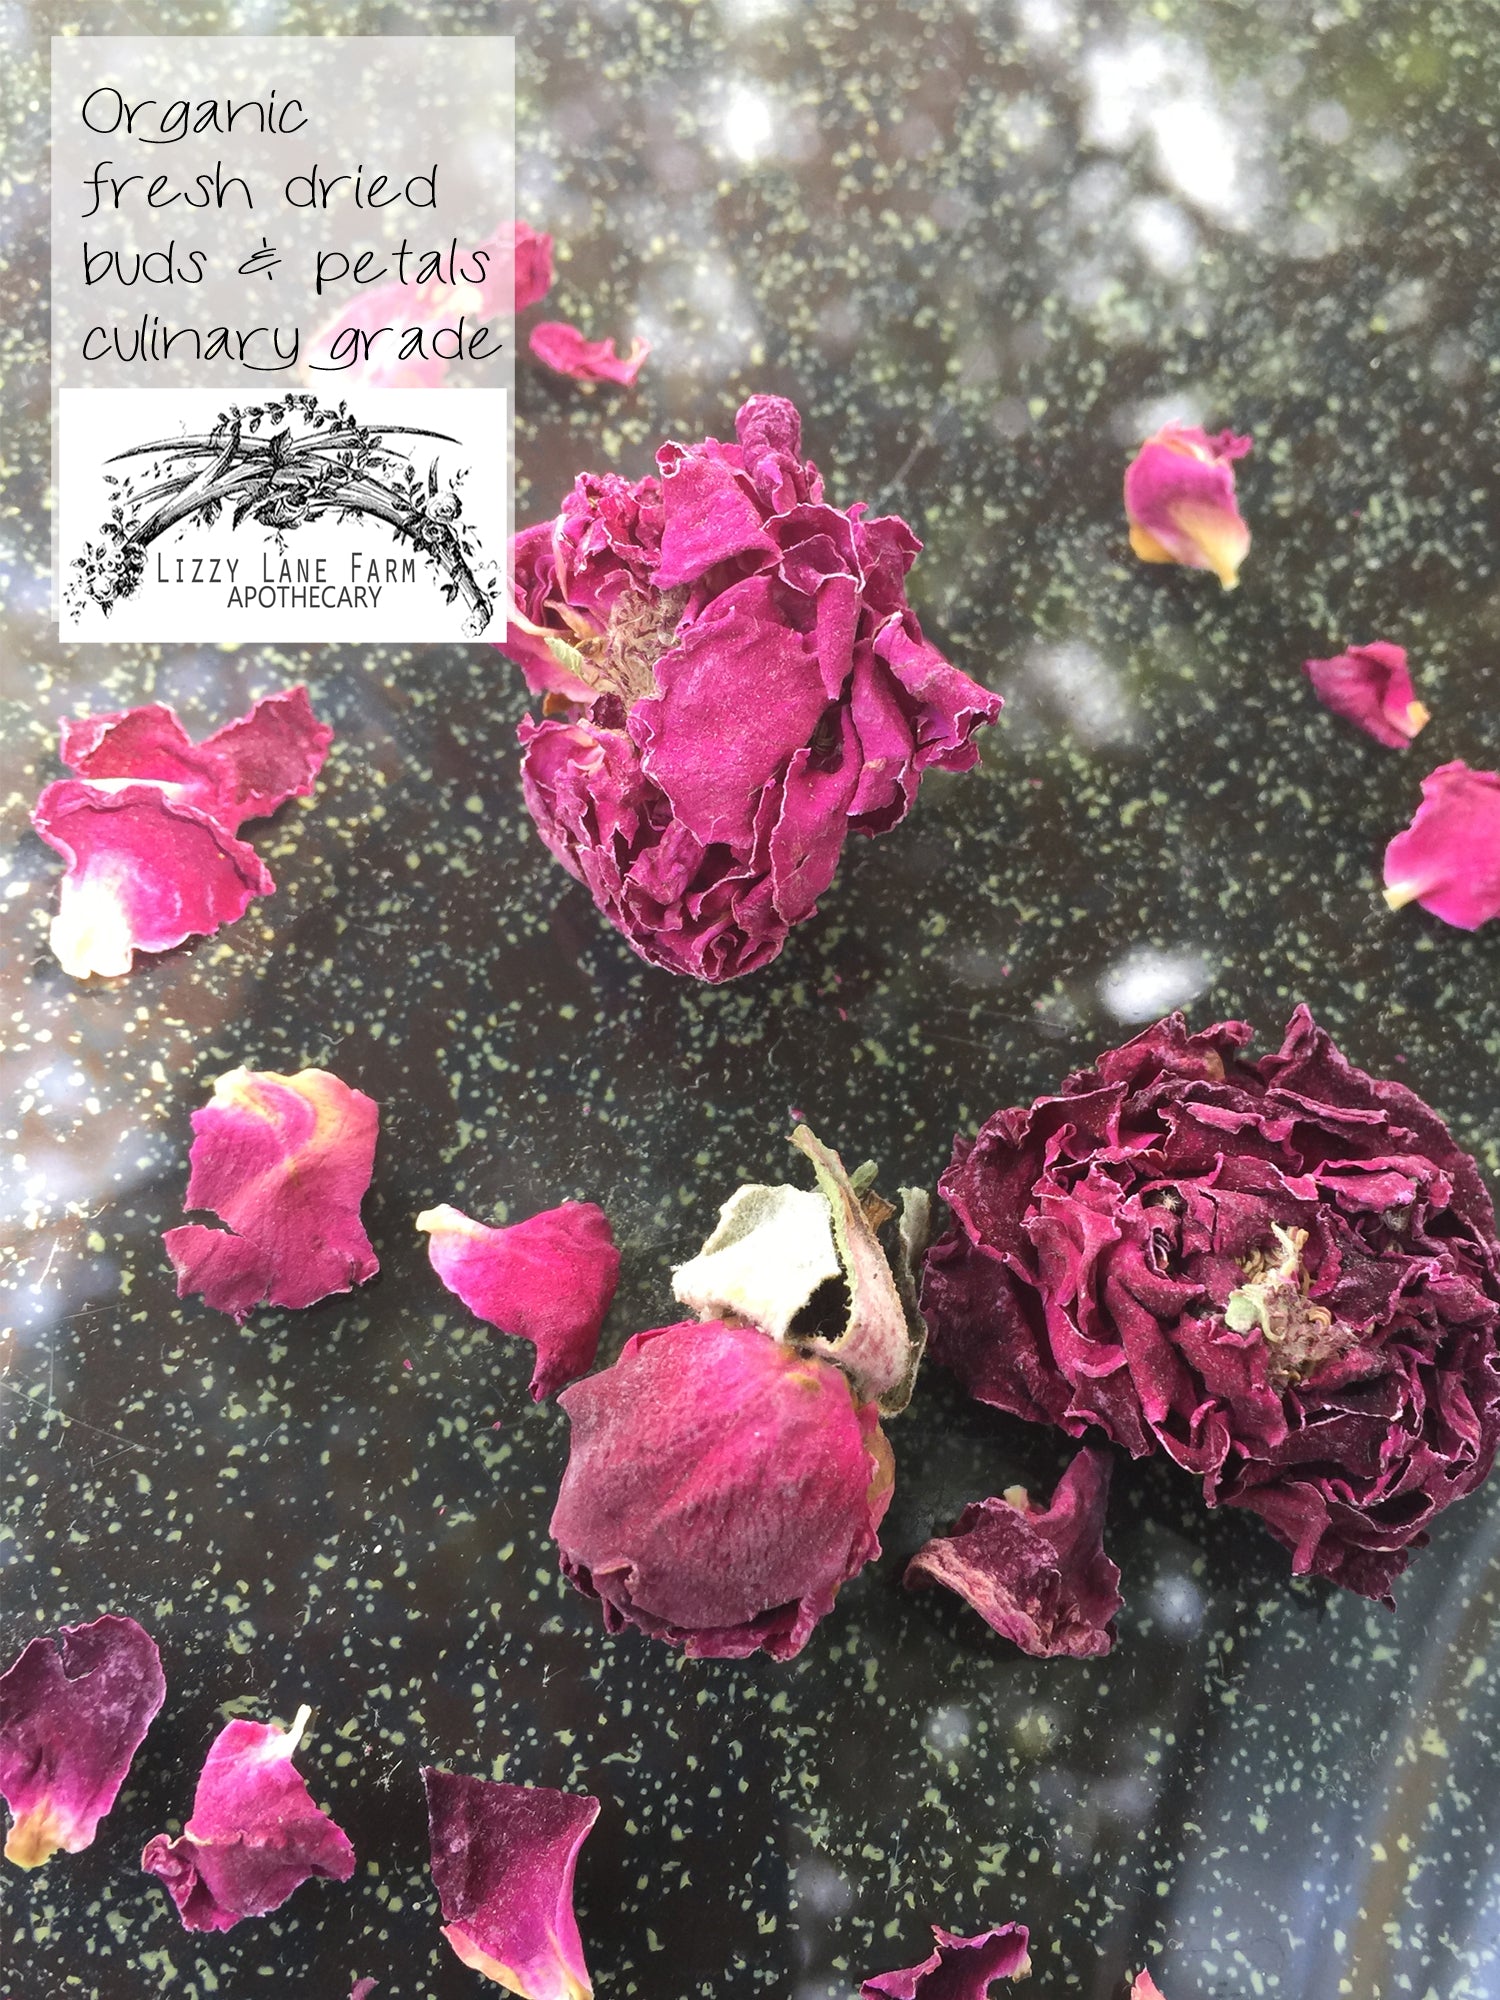 Rose Wedding Confetti • Wedding Toss • Real Dry Flowers • Petal Confetti- Aisle Scatter - Lizzy Lane Farm Apothecary